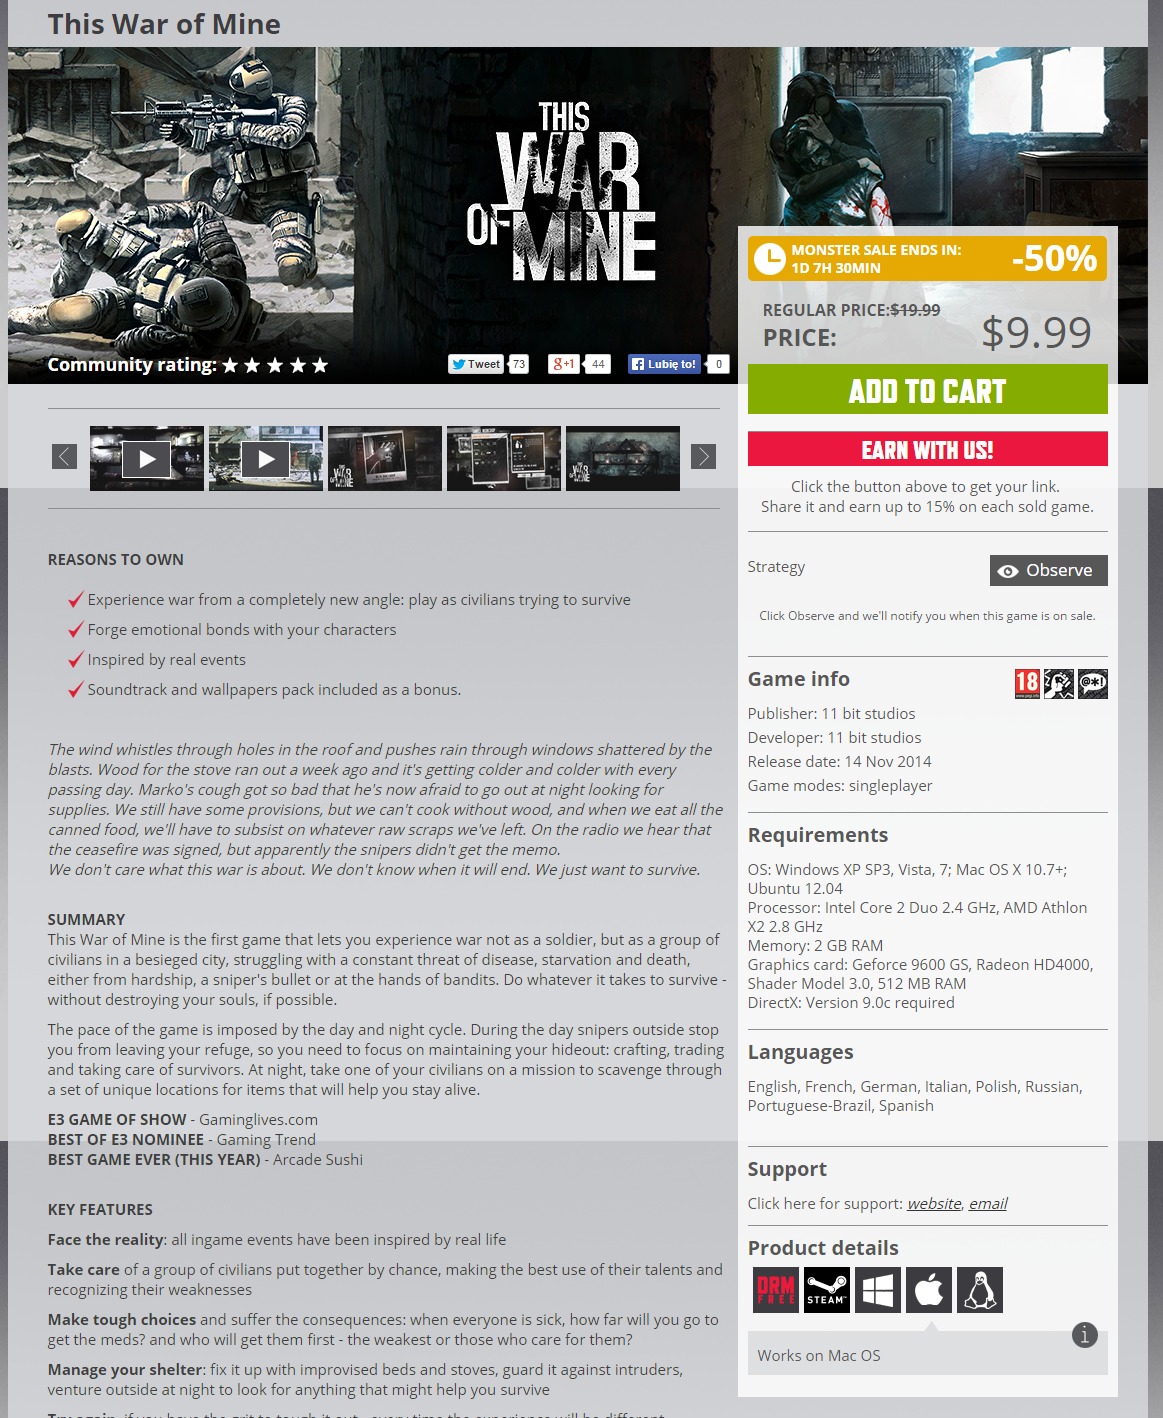 This War of Mine   Buy it now and download instantly   GamesRepublic.com.jpeg